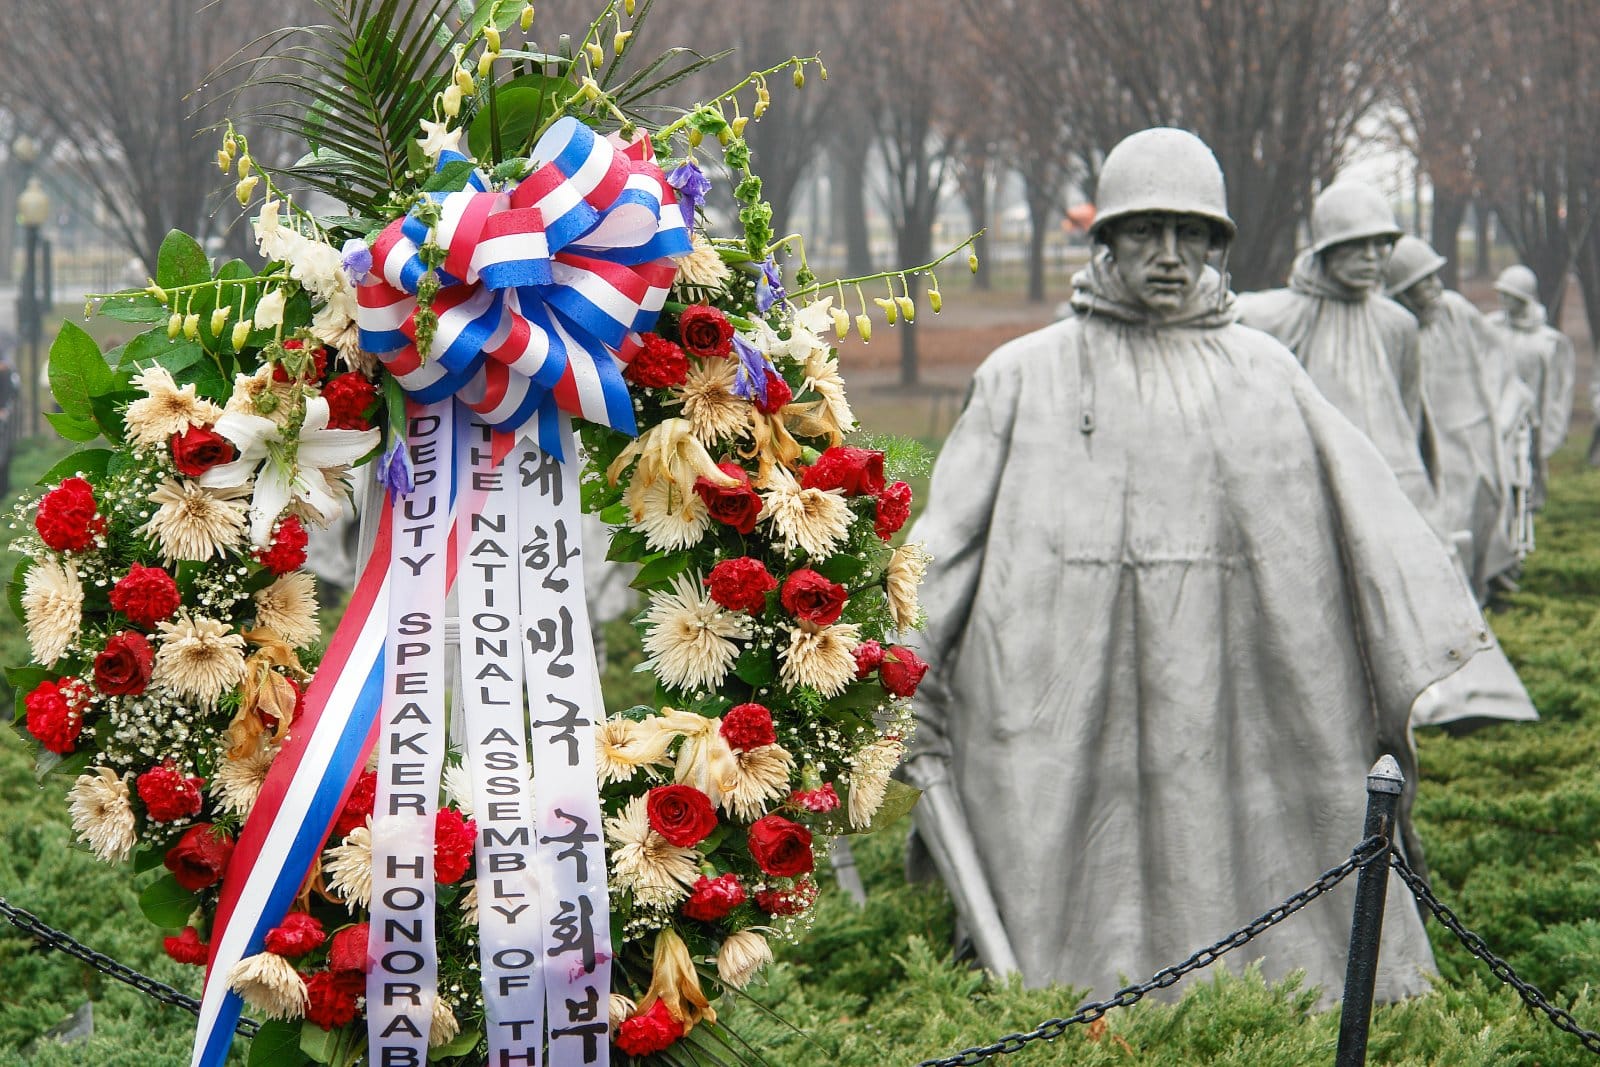 <p class="wp-caption-text">Image Credit: Shutterstock / Orhan Cam</p>  <p>This memorial honors the service and sacrifice of those who served in Korea, often referred to as “The Forgotten War.”</p>